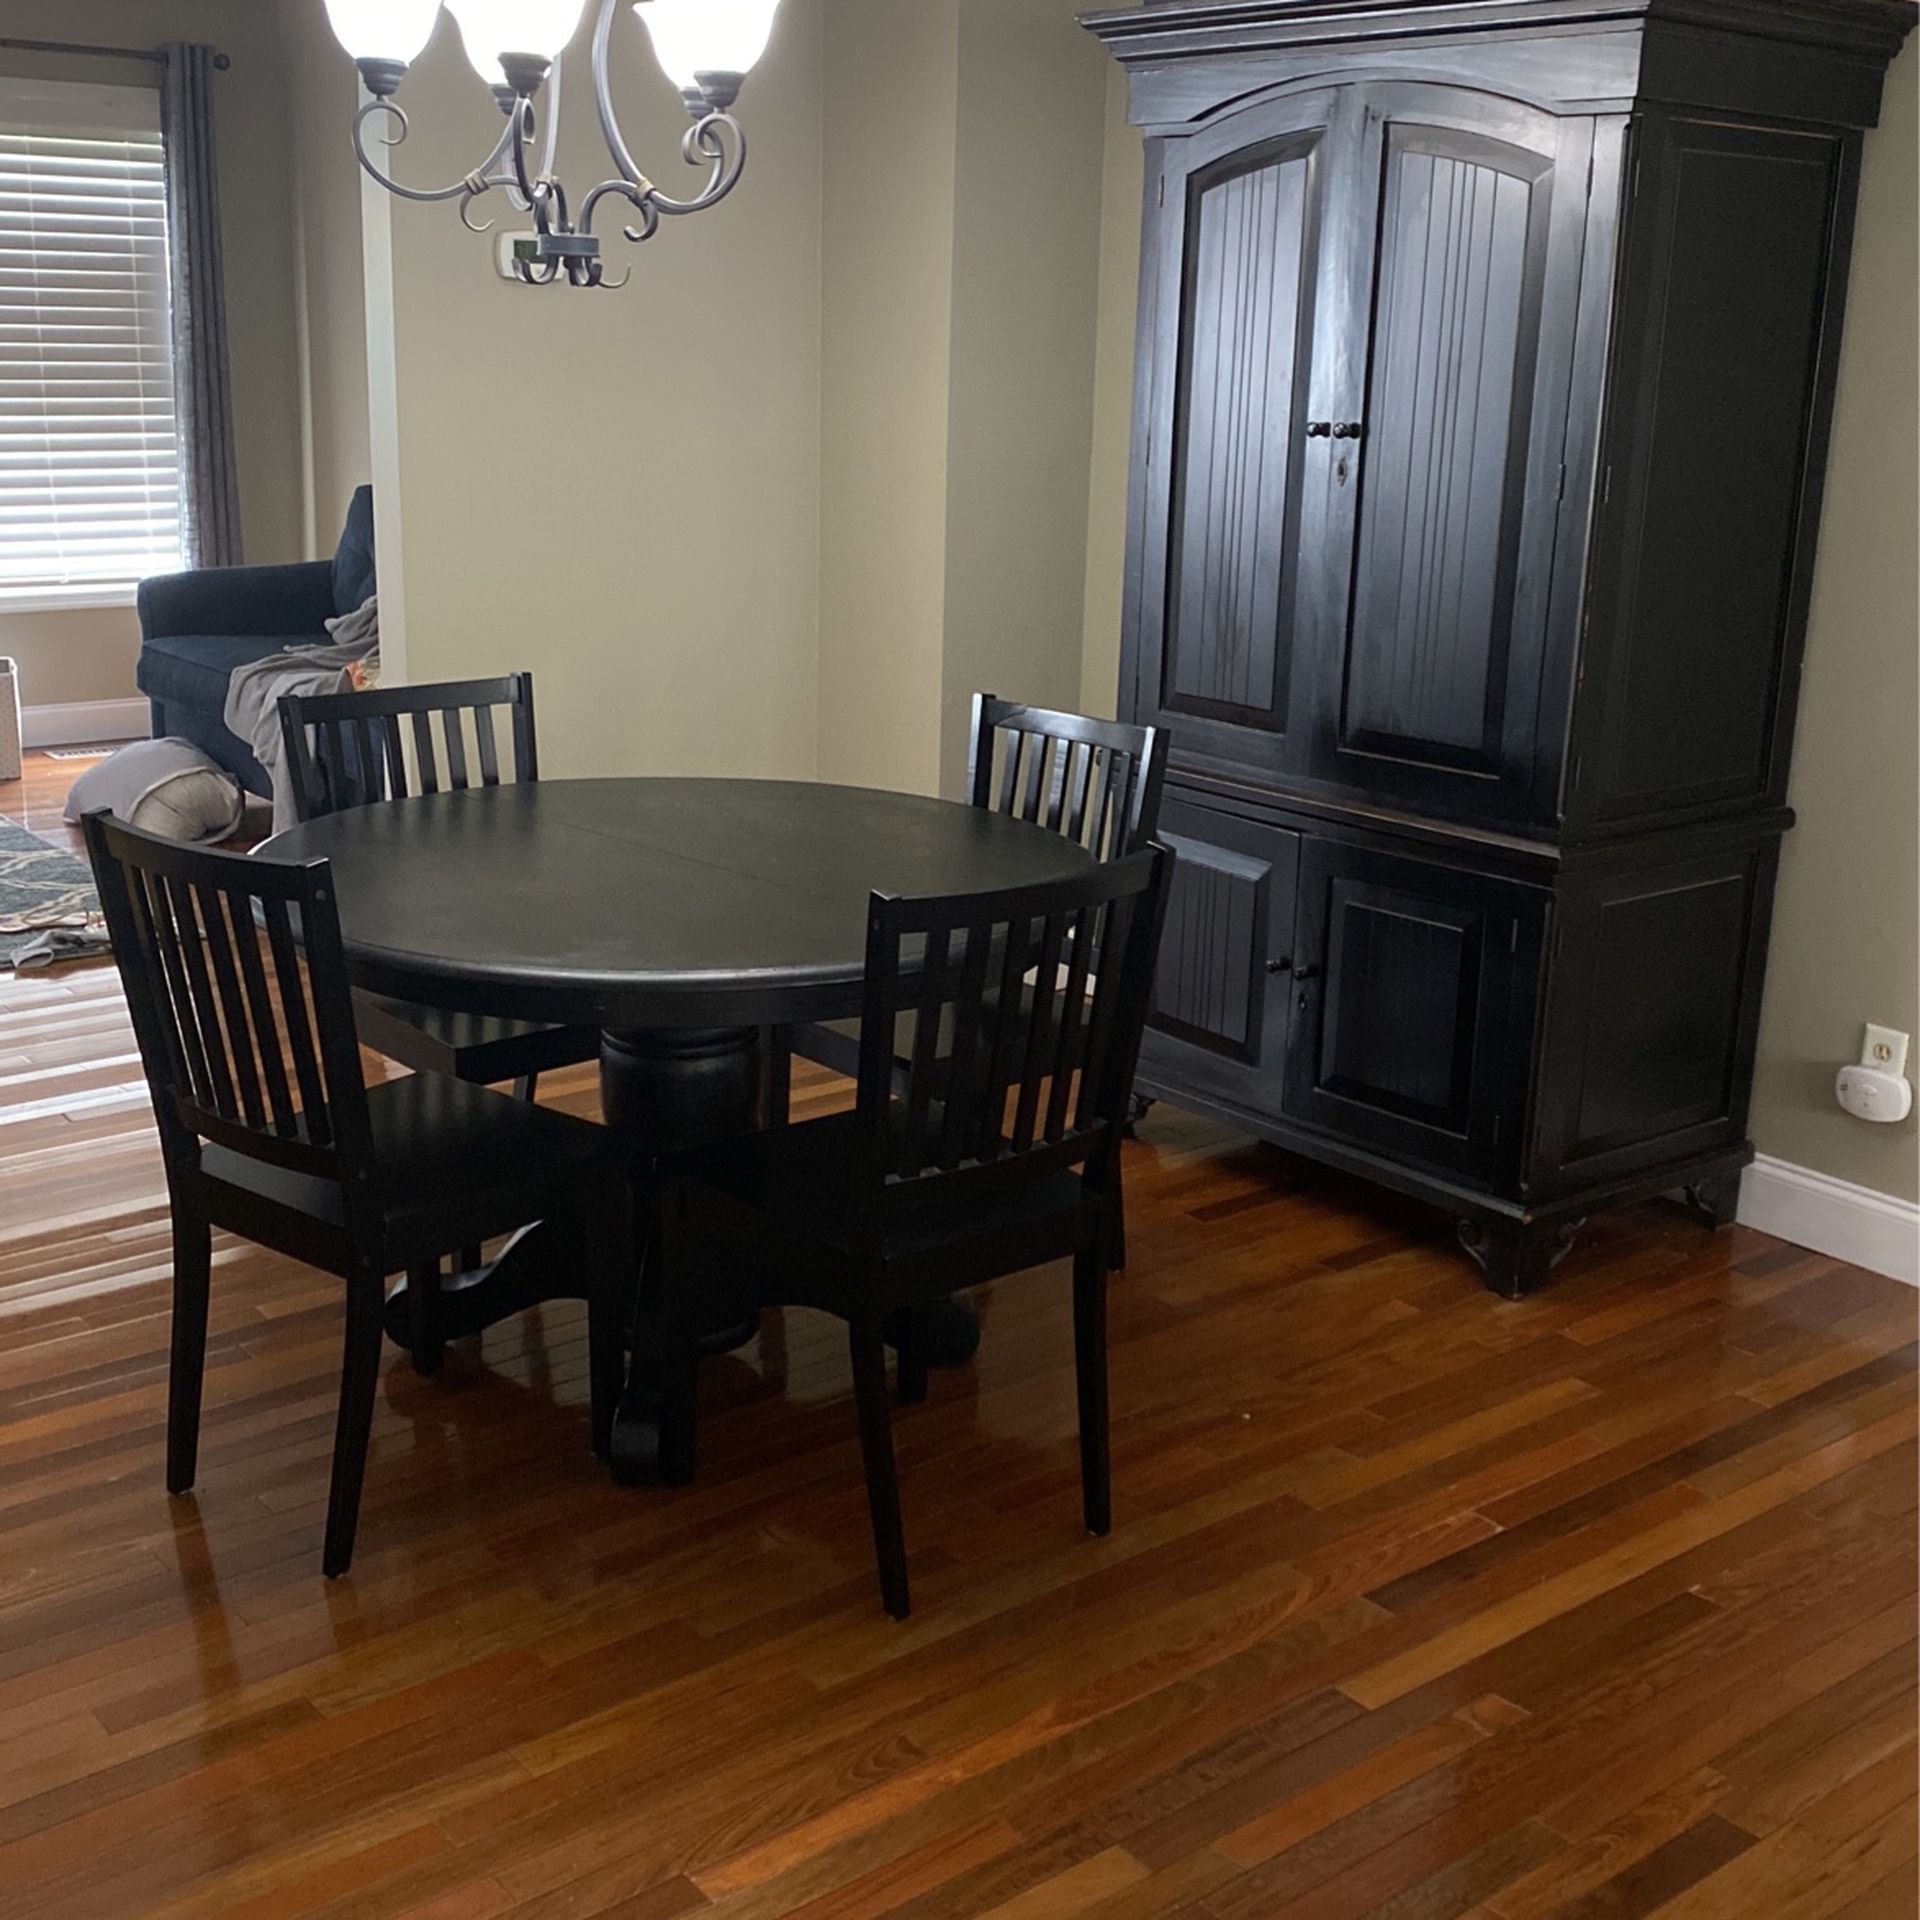 Round Dining Room Table, Chairs And Armoire